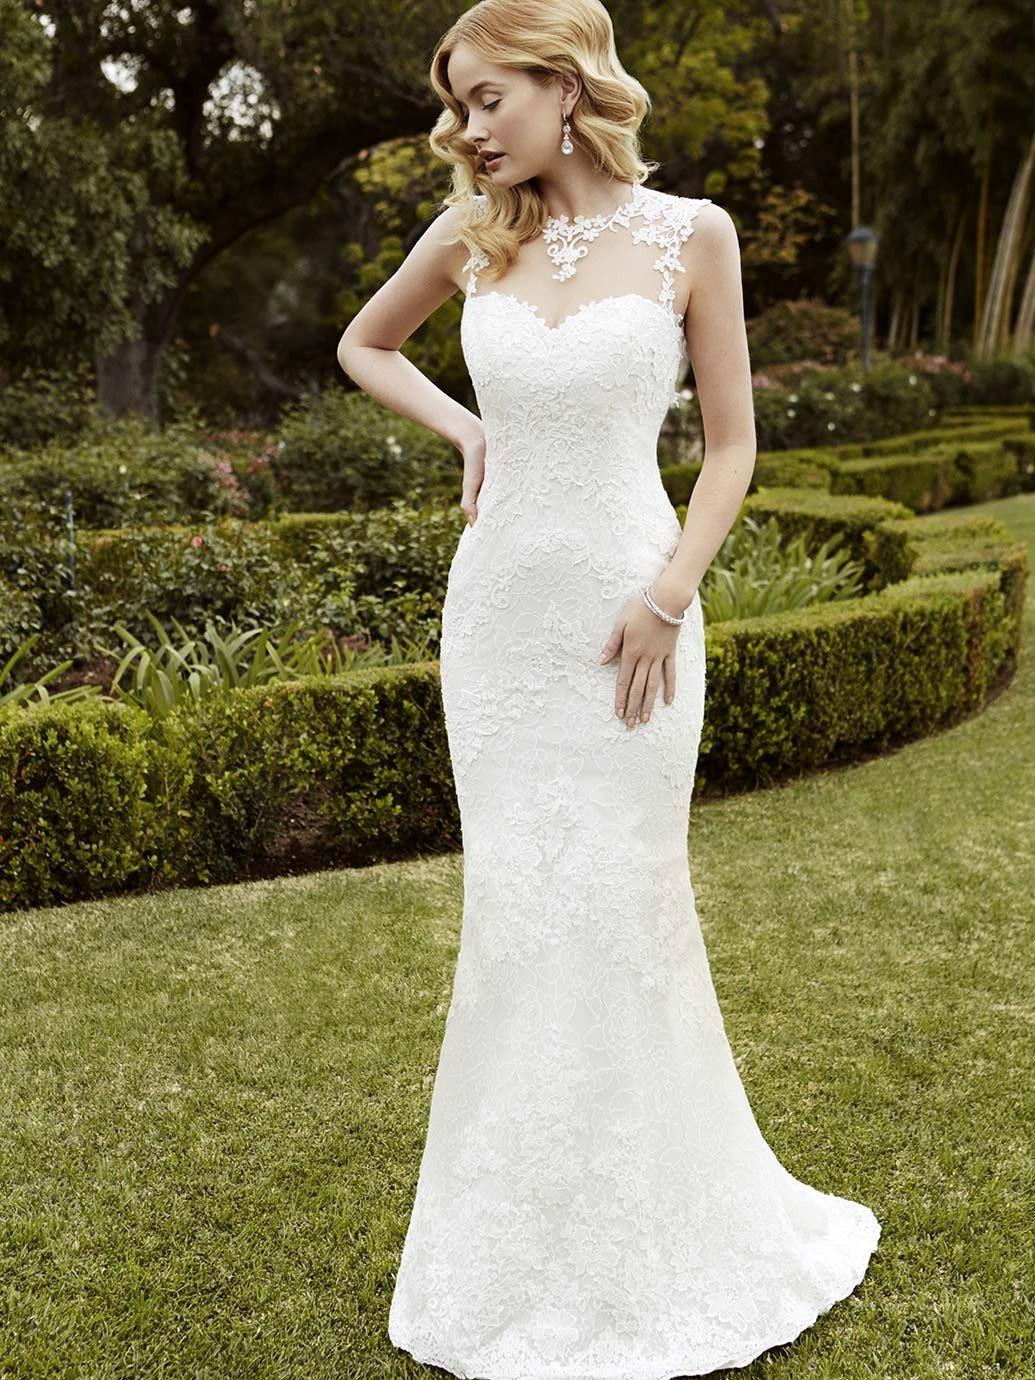 Wedding Dress Shapes and Styles for Brides with a Small Bust -  hitched.co.uk - hitched.co.uk